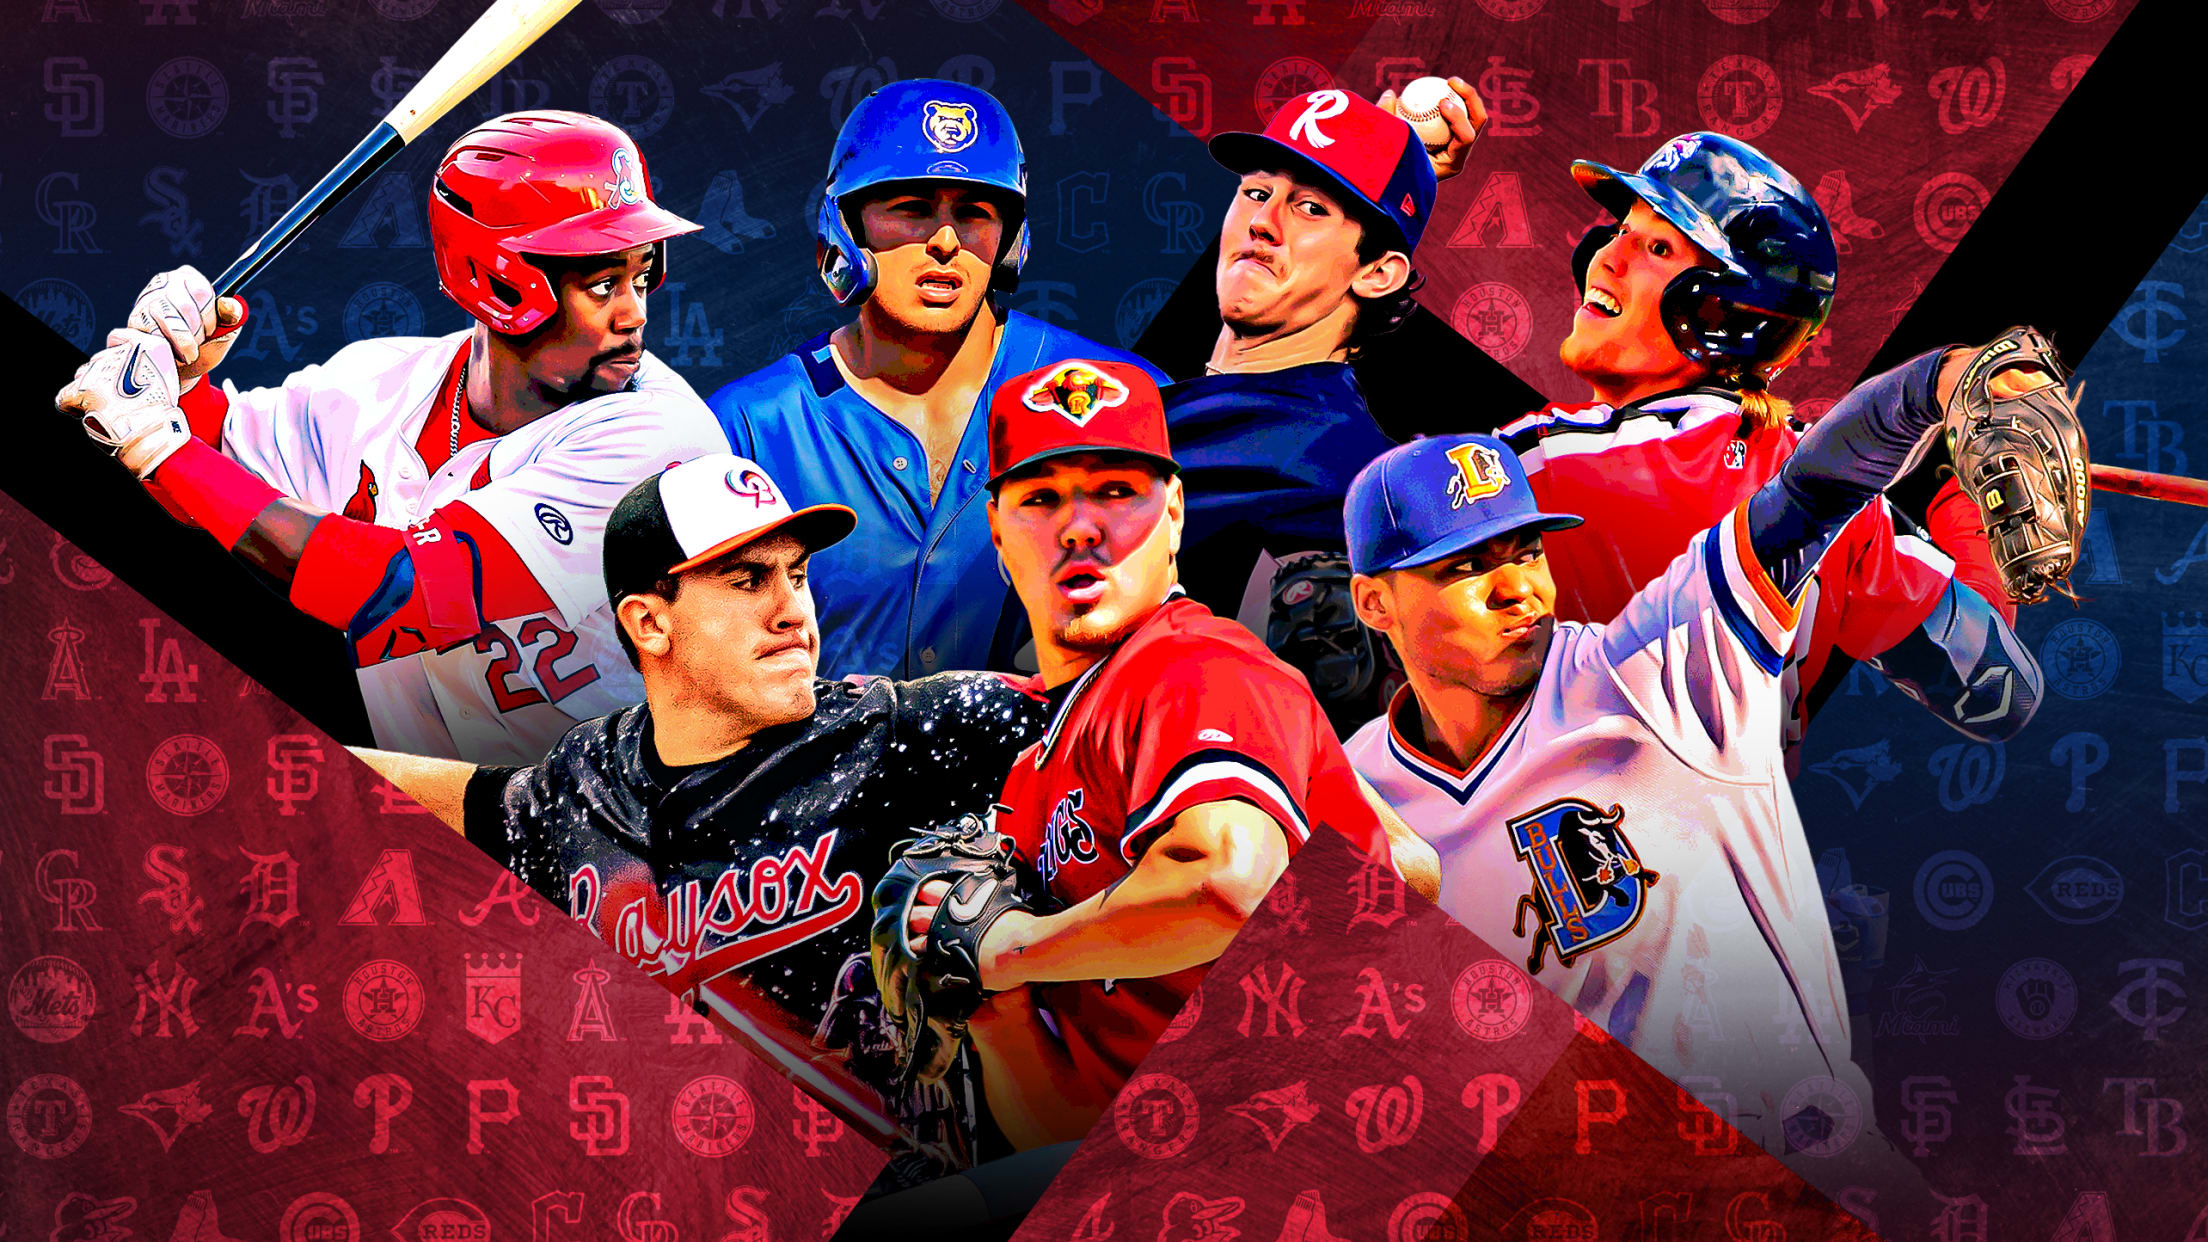 A photo illustration showing 7 prospects against a red, black and blue background